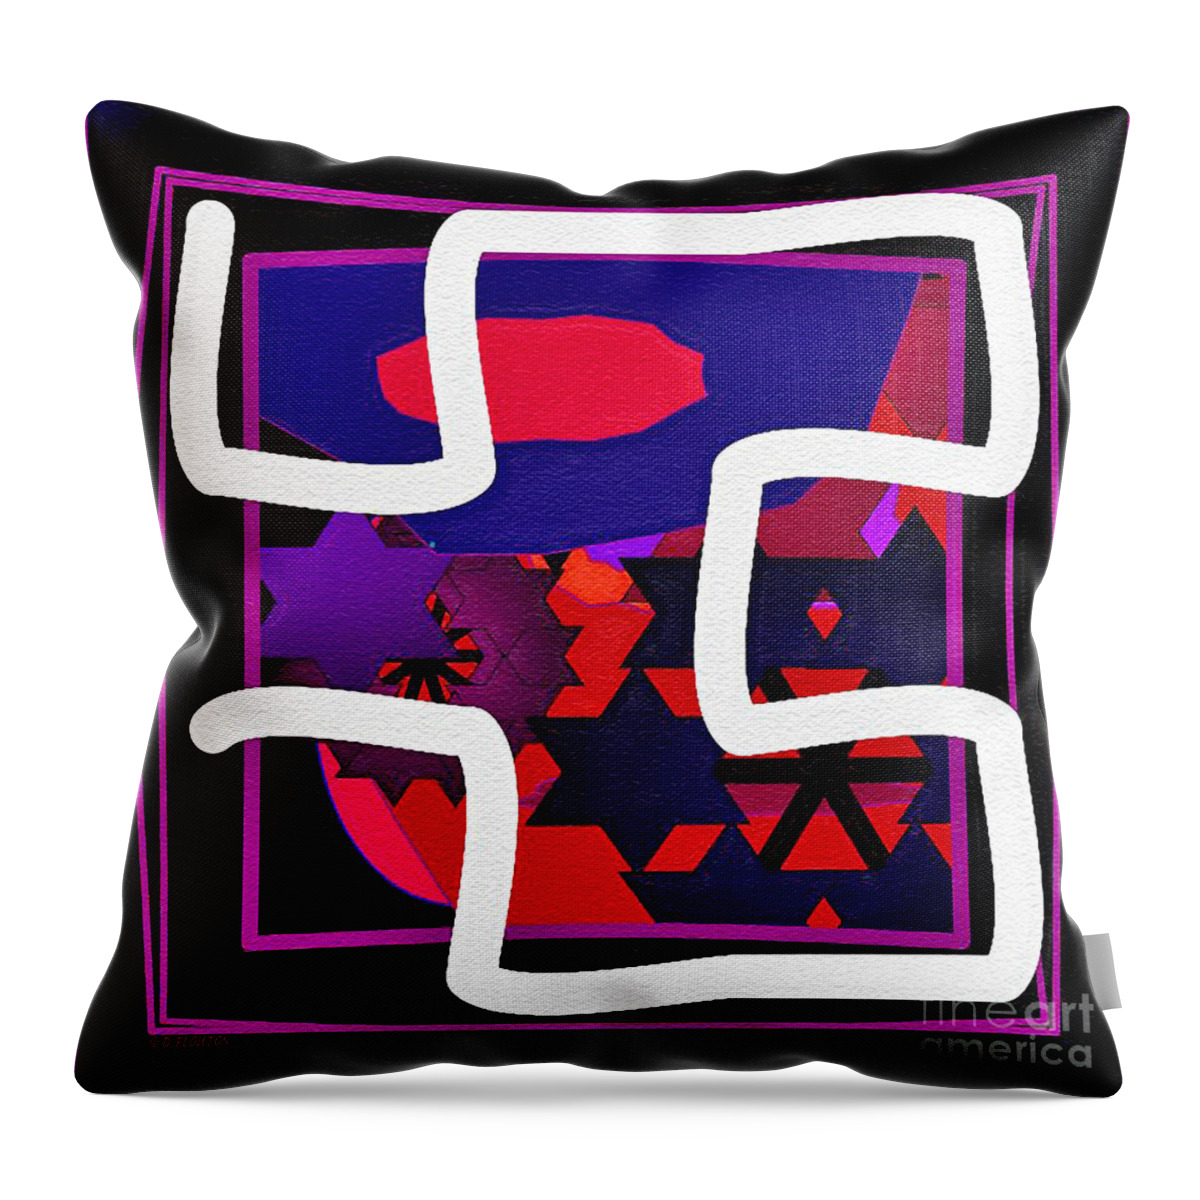 Ebsq Throw Pillow featuring the digital art White Maze on Black by Dee Flouton